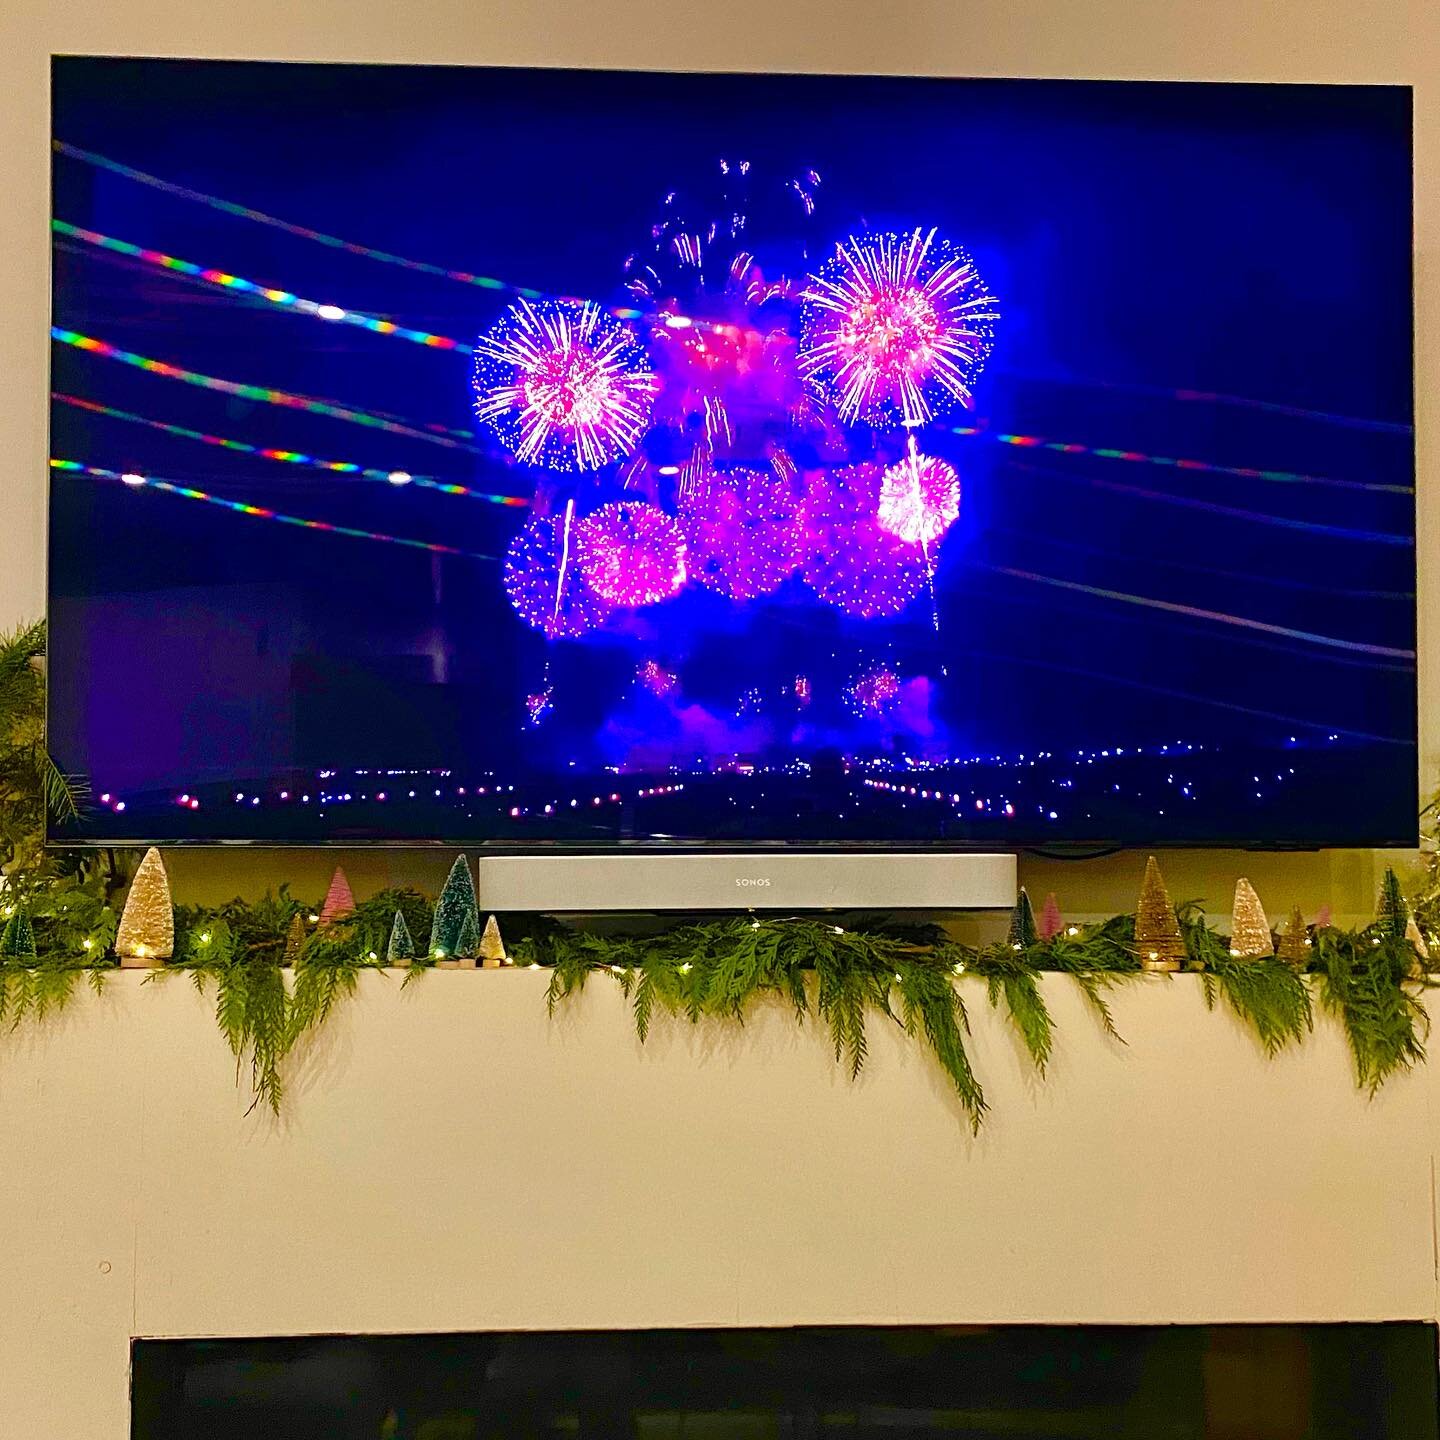 Instead of streaming bad movies, I&rsquo;m streaming AI fireworks &hellip; #happynewyear2024 #bringiton 

and wondering when to take Christmas decorations down since I grew a forest&hellip;